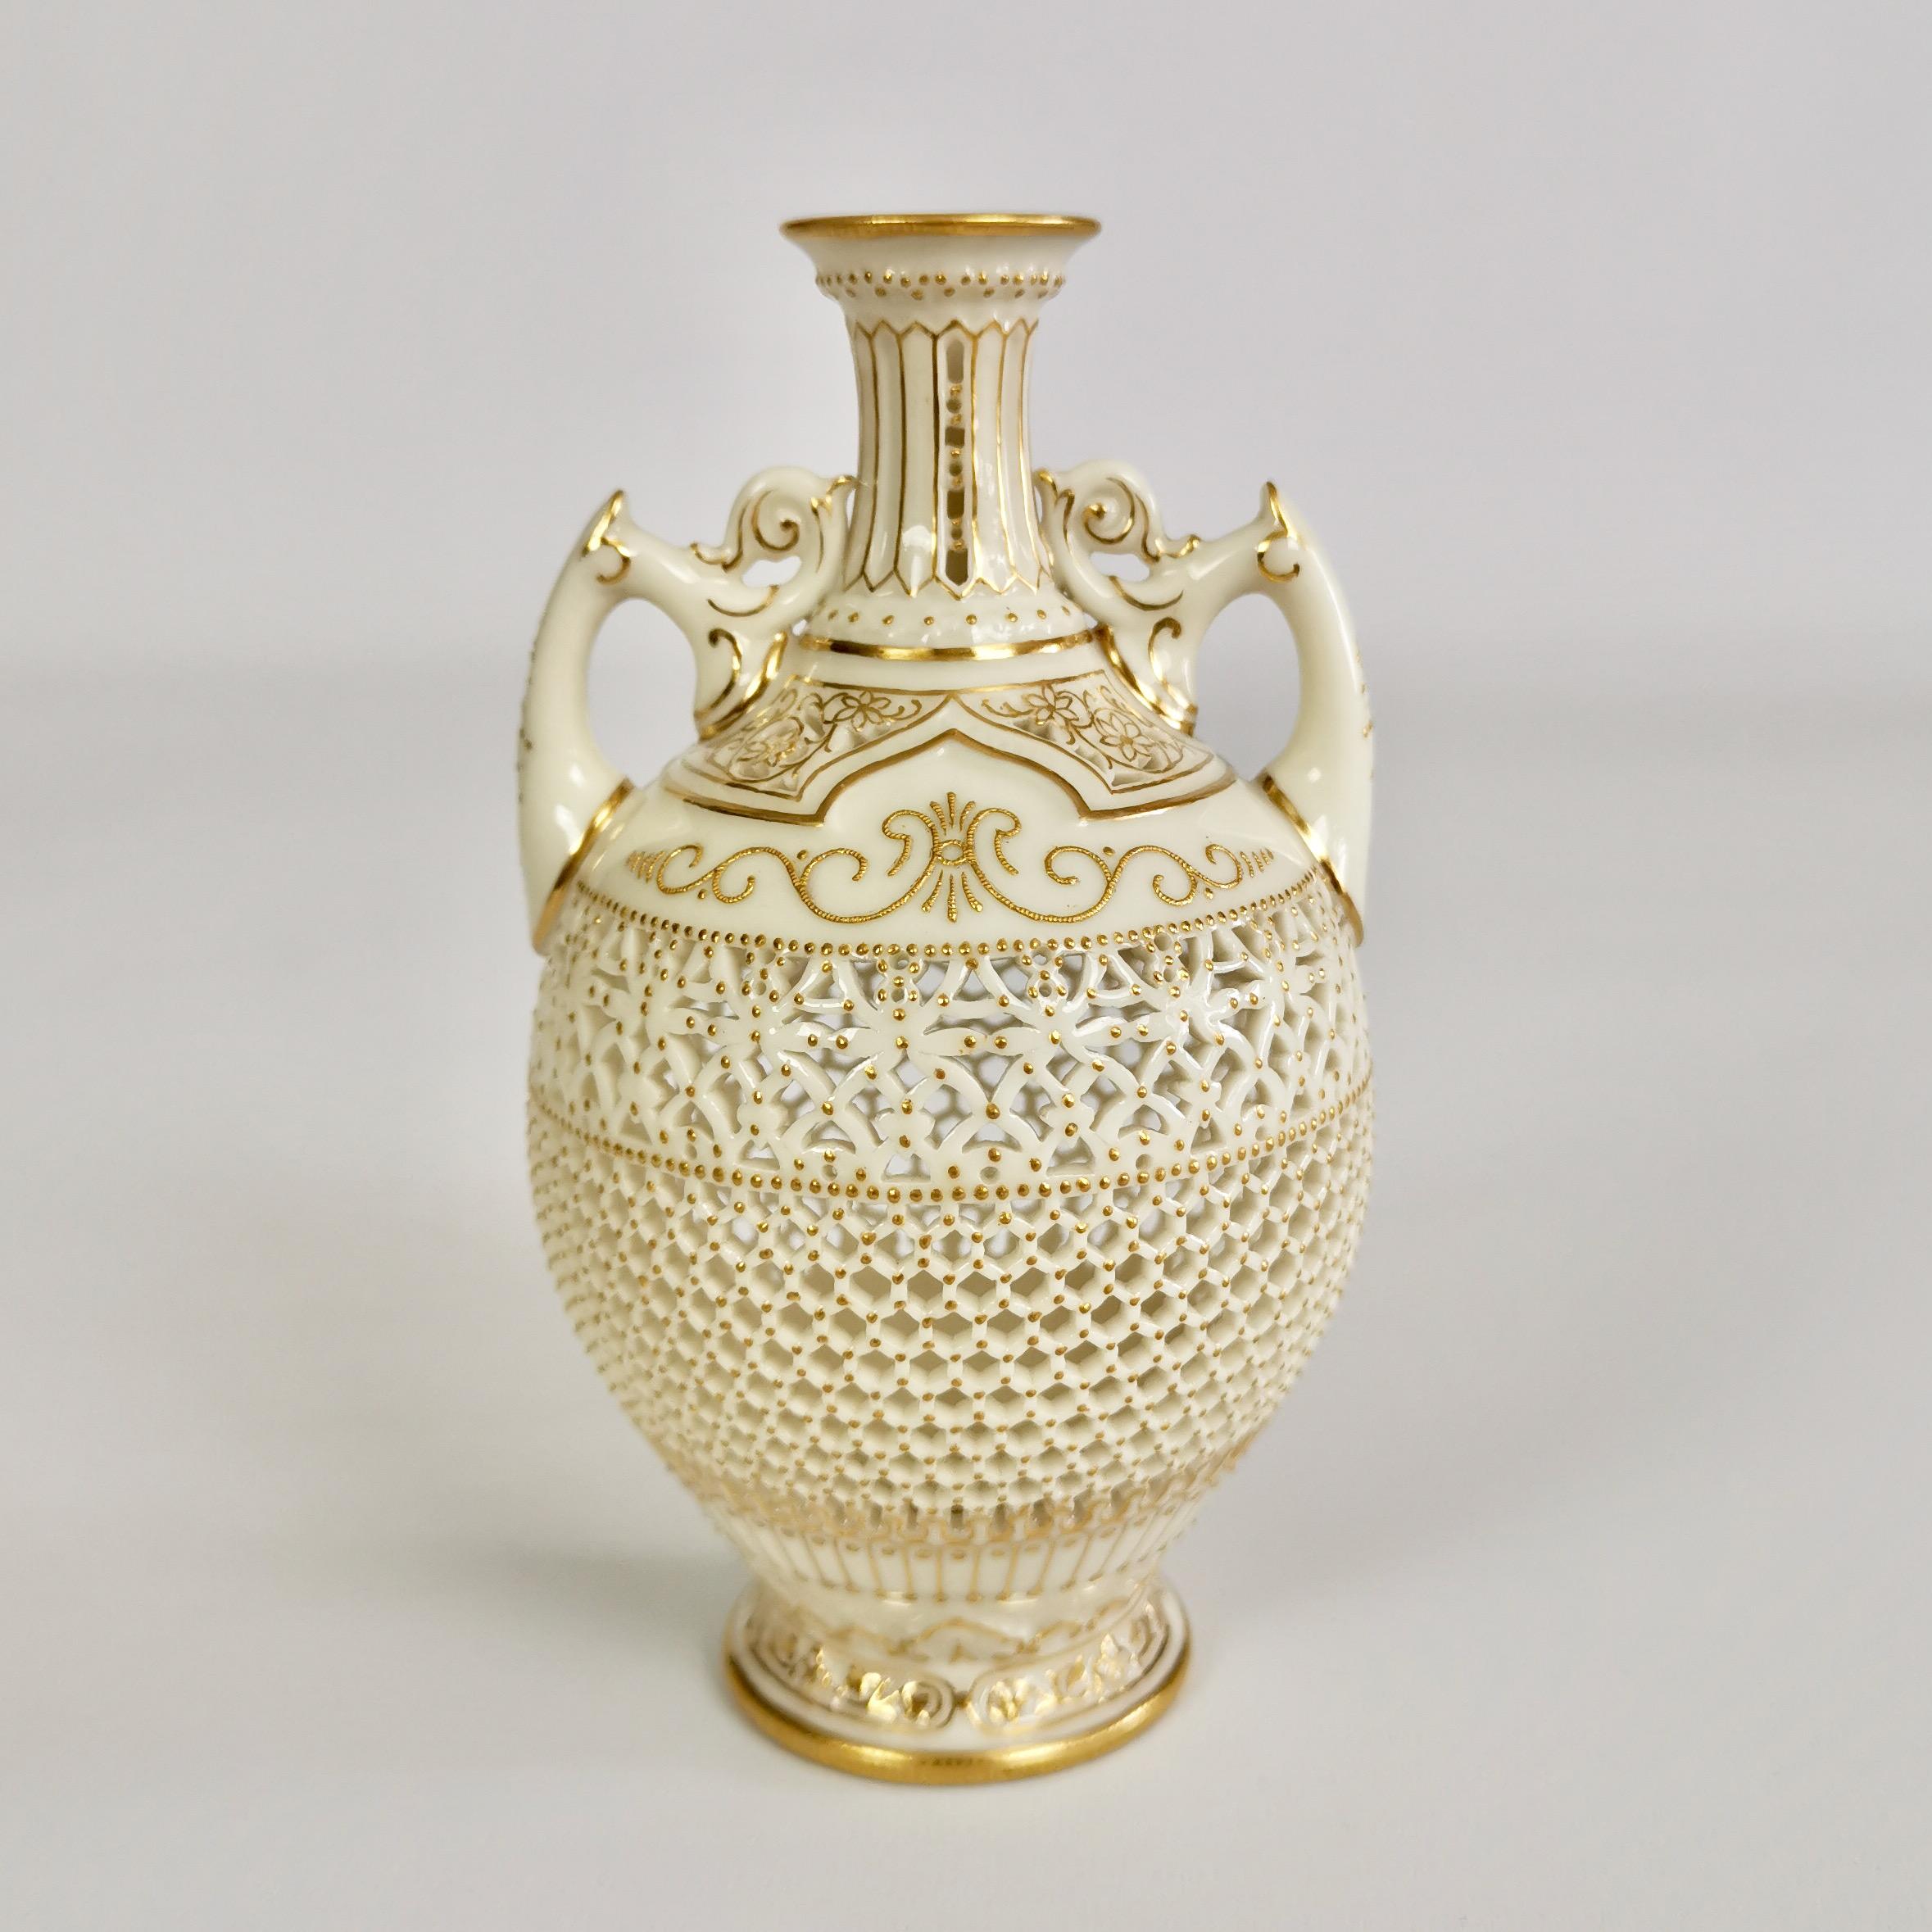 Edwardian Royal Worcester Small Persian Porcelain Vase, Reticulated George Owen, 1917